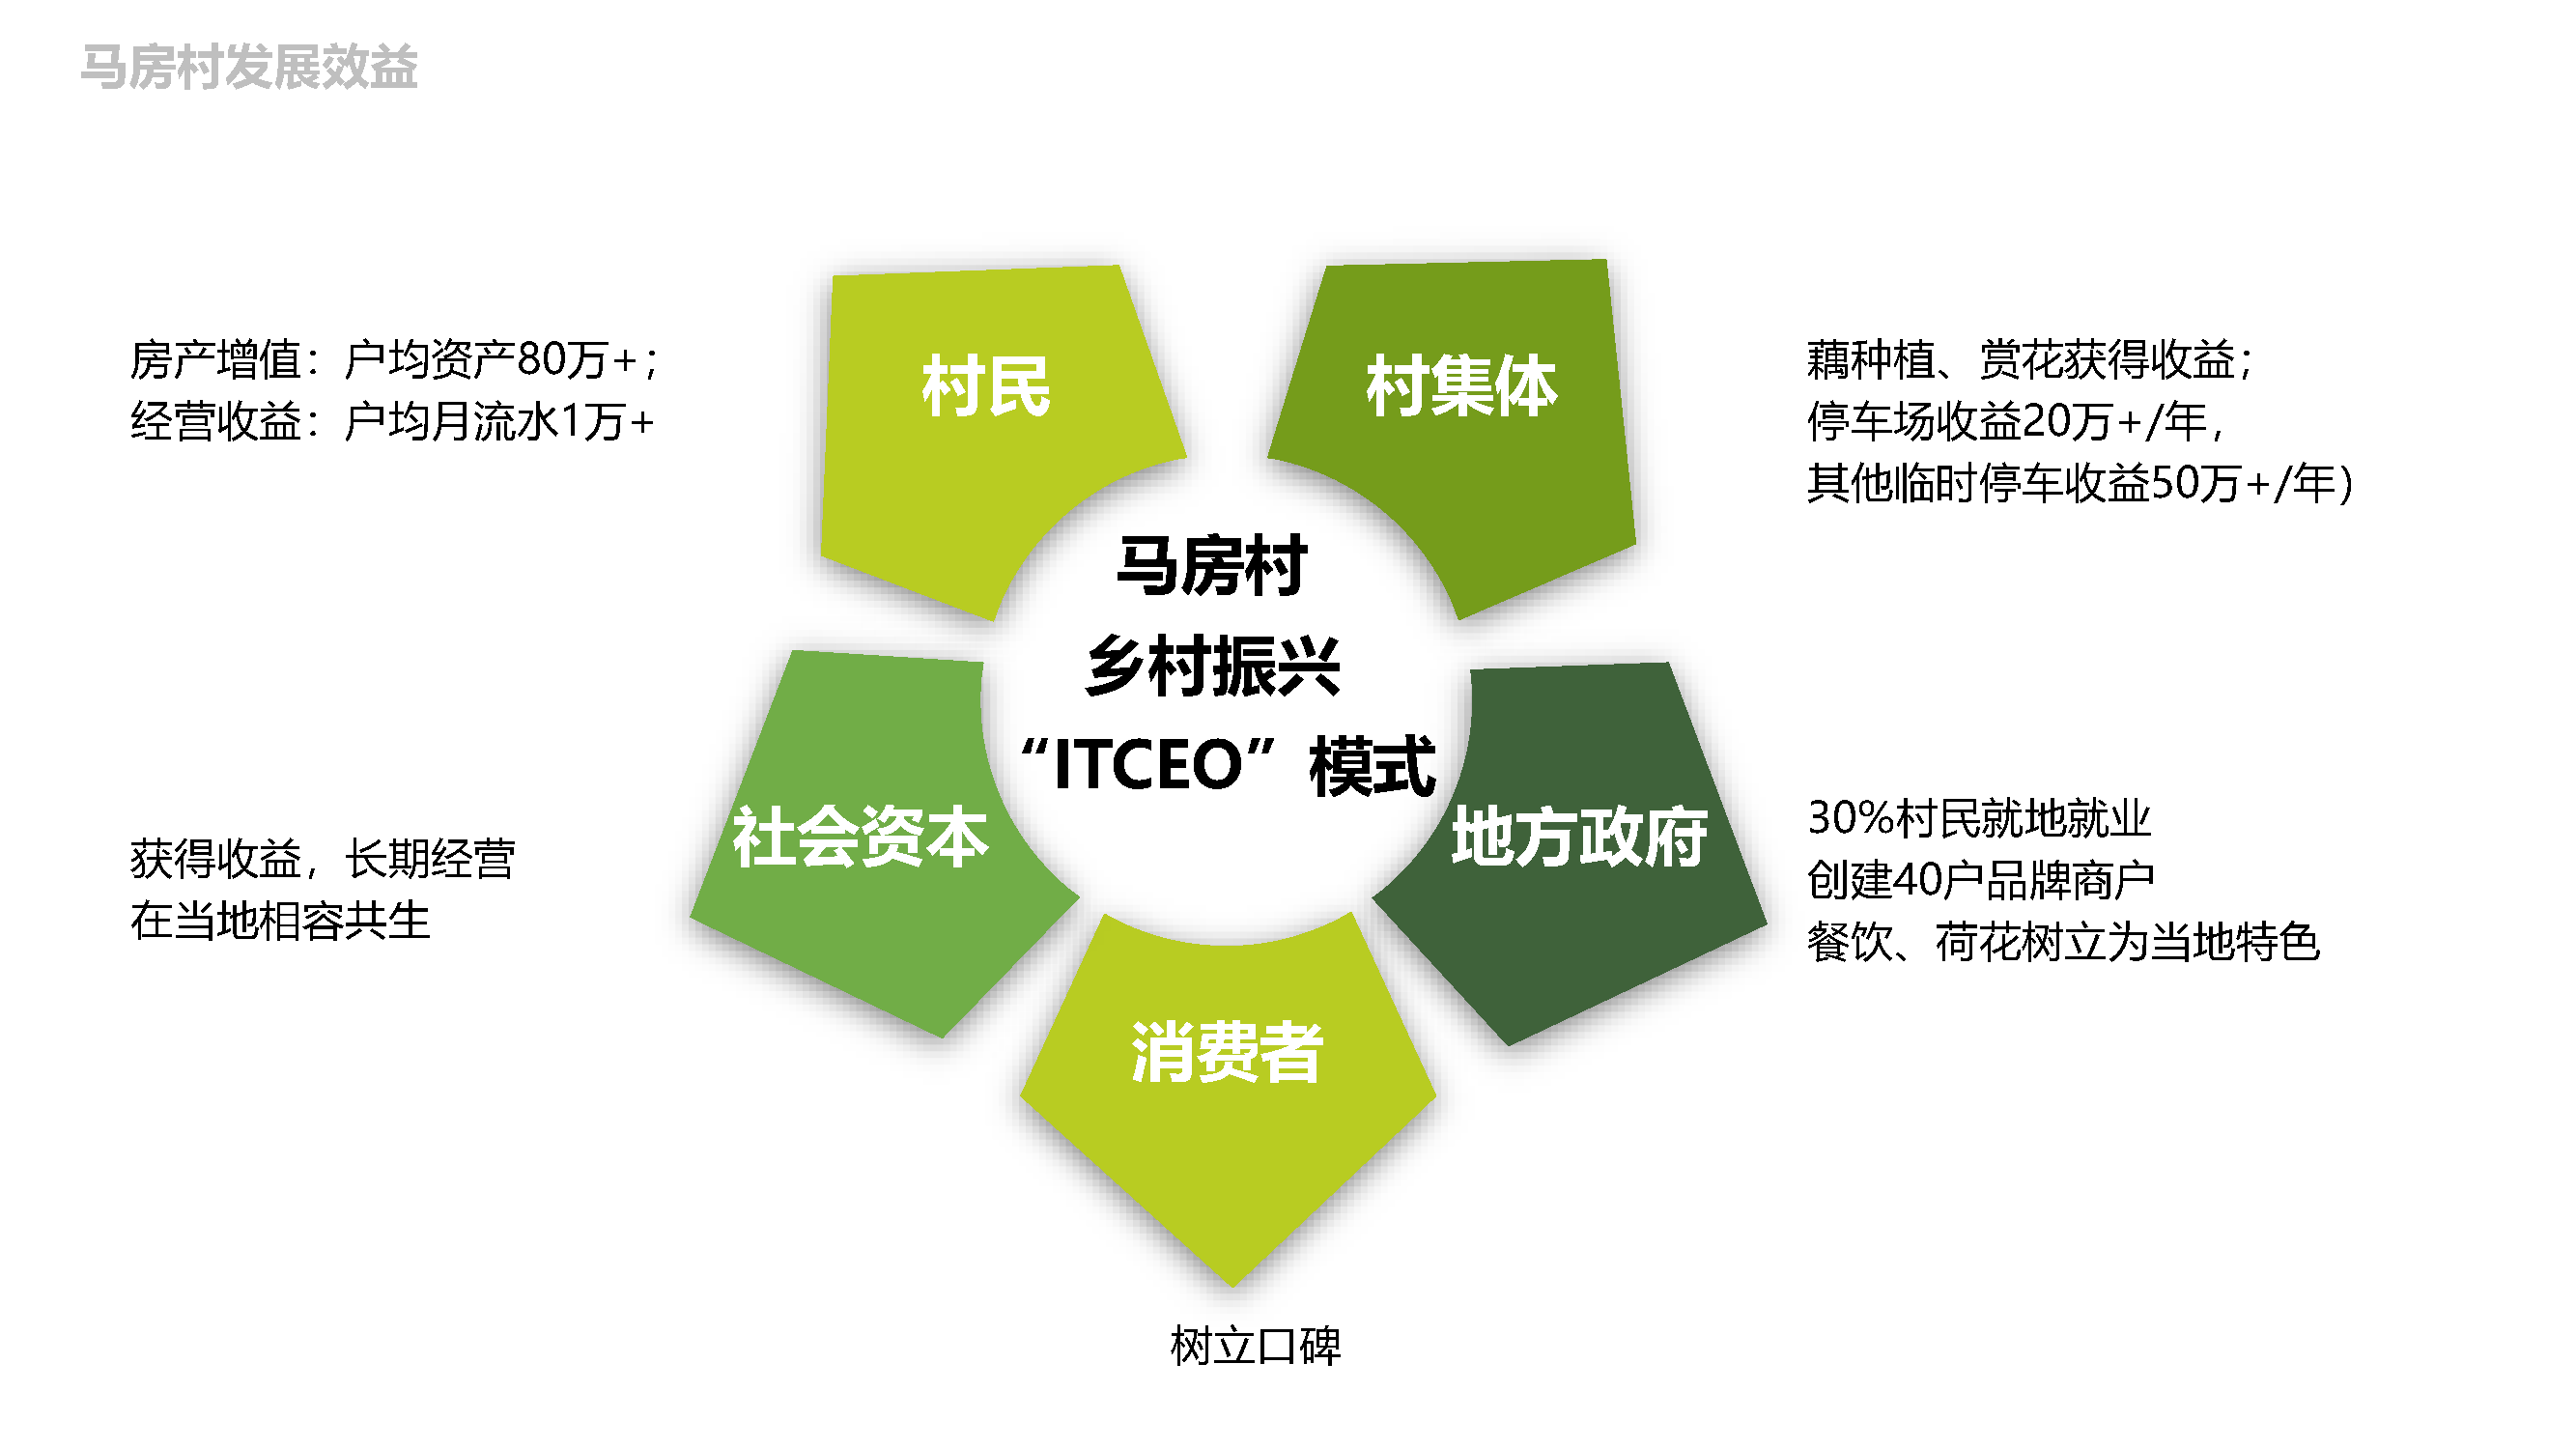 ITCEO模式.png